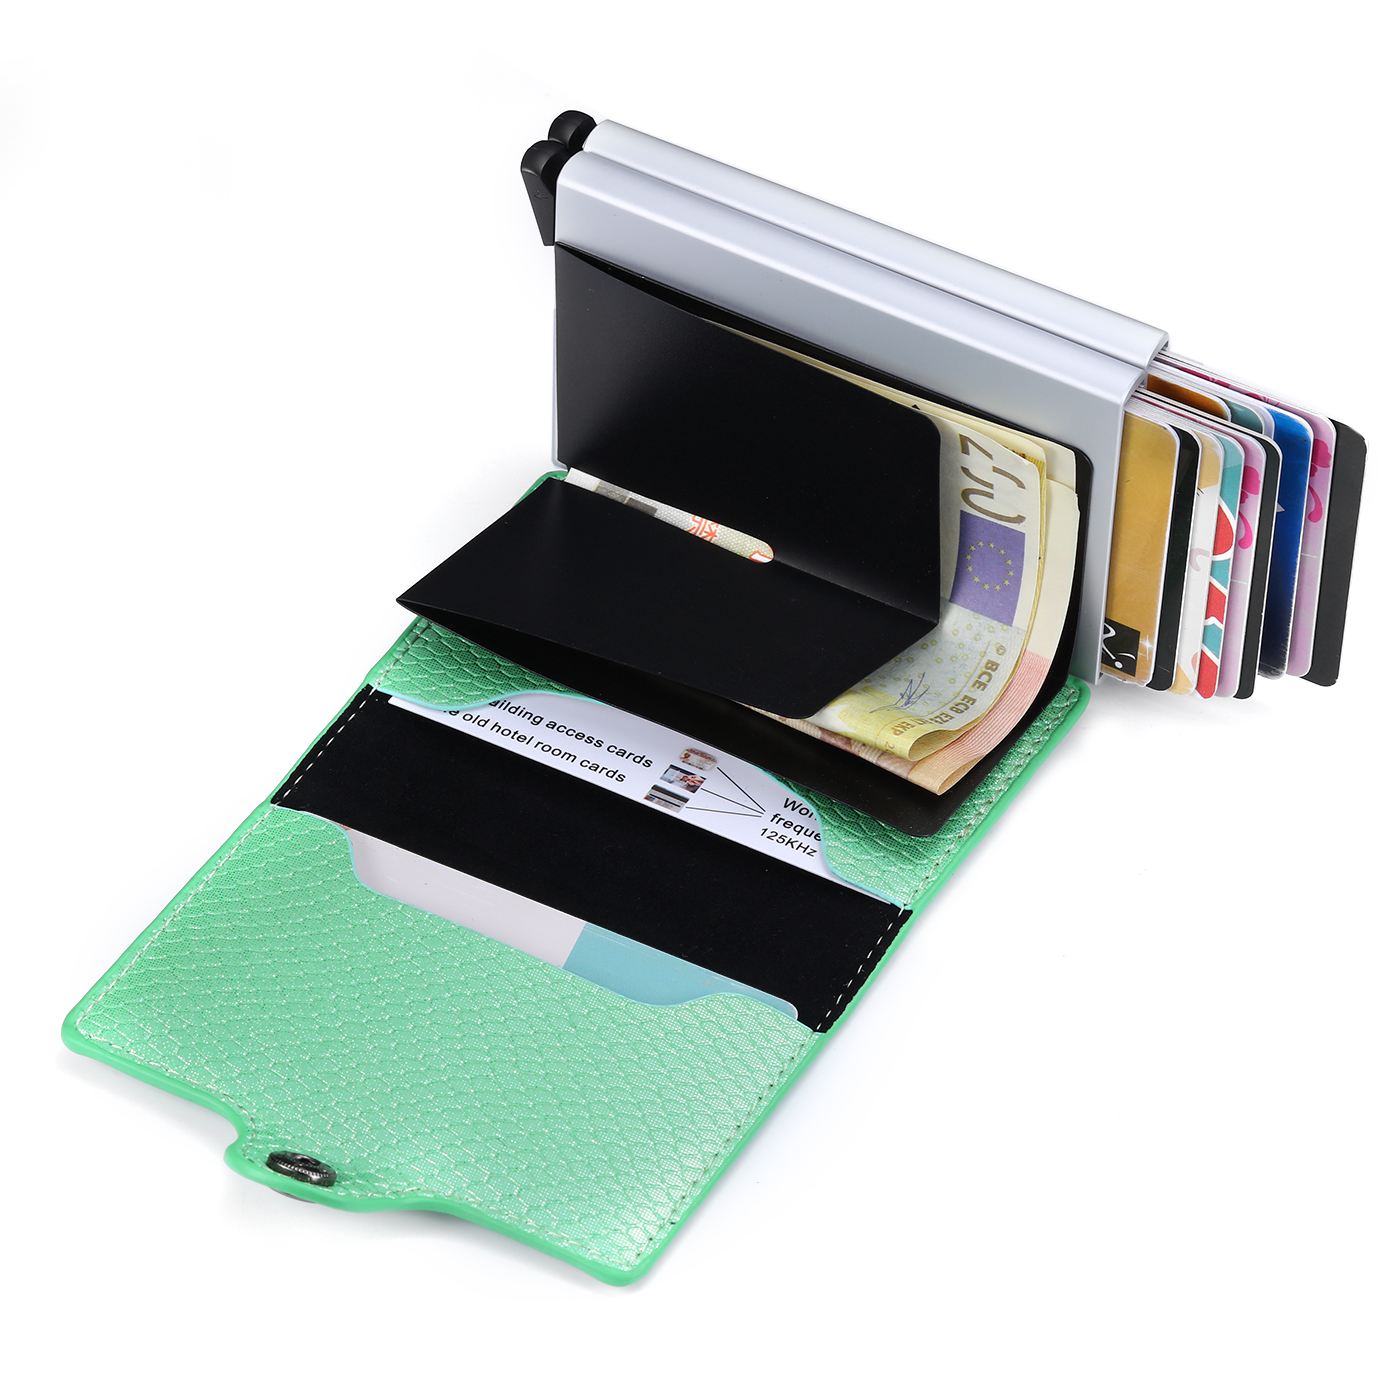 2020 New Double Layer Security Credit Card Purse RFID Blocking Wallet Slim Aluminum Case Holder Wallet for Men Women